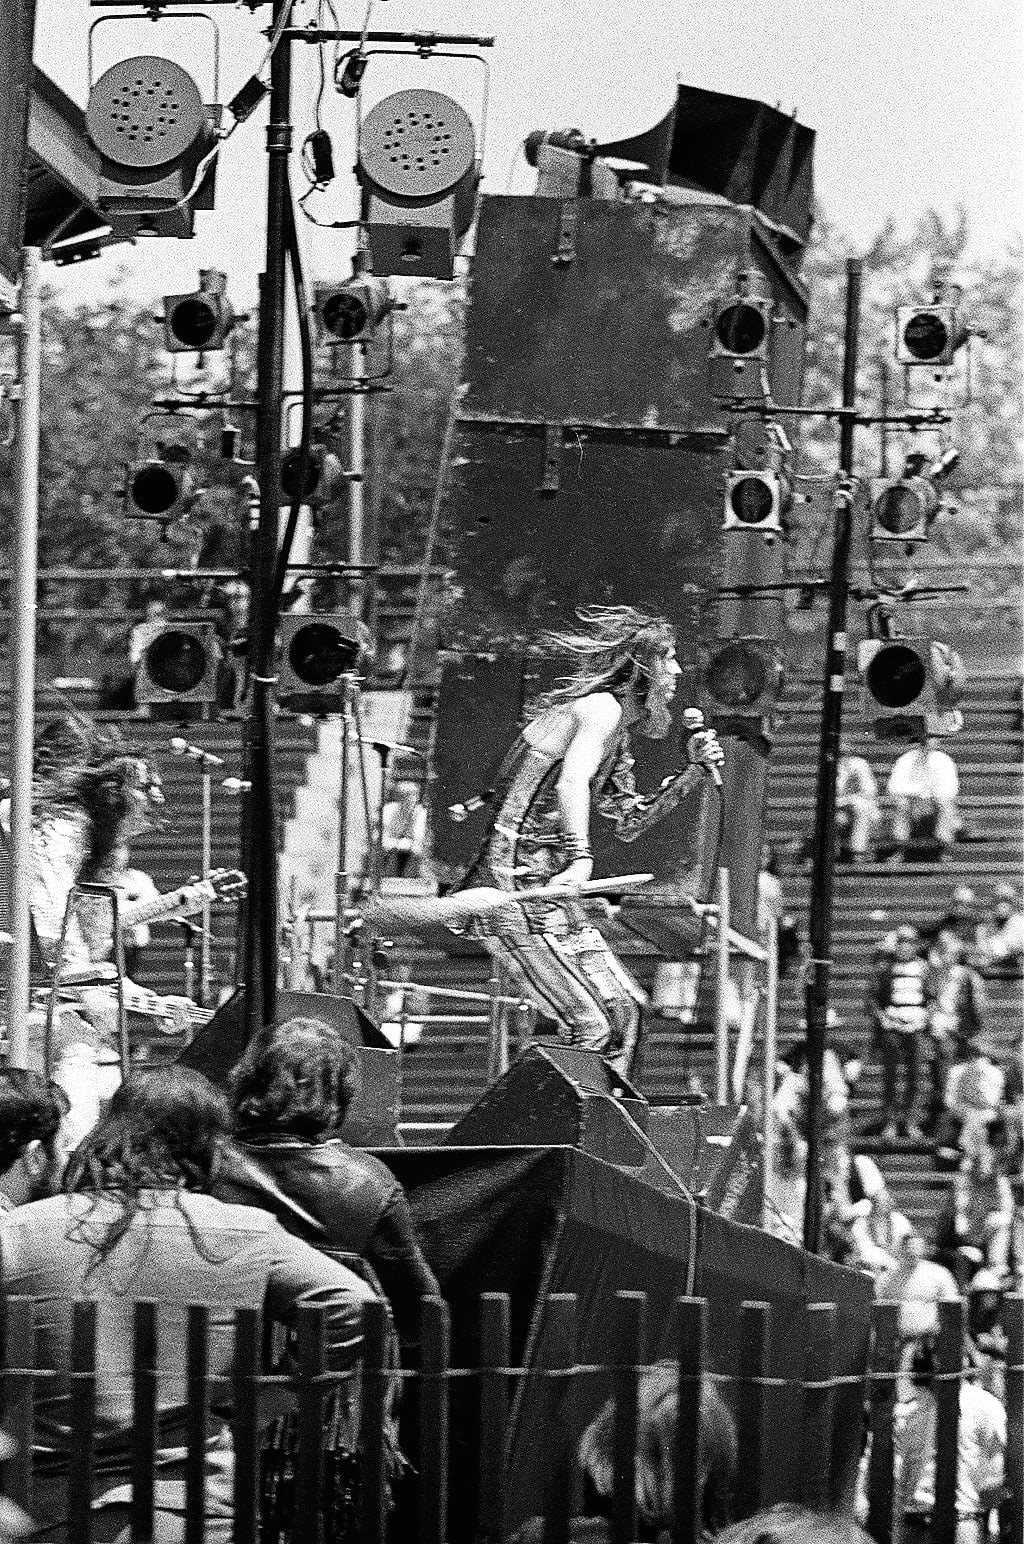 Alice Cooper makes his Toronto debut at the Toronto Pop Festival at Varsity stadium 51 years ago, 1970s